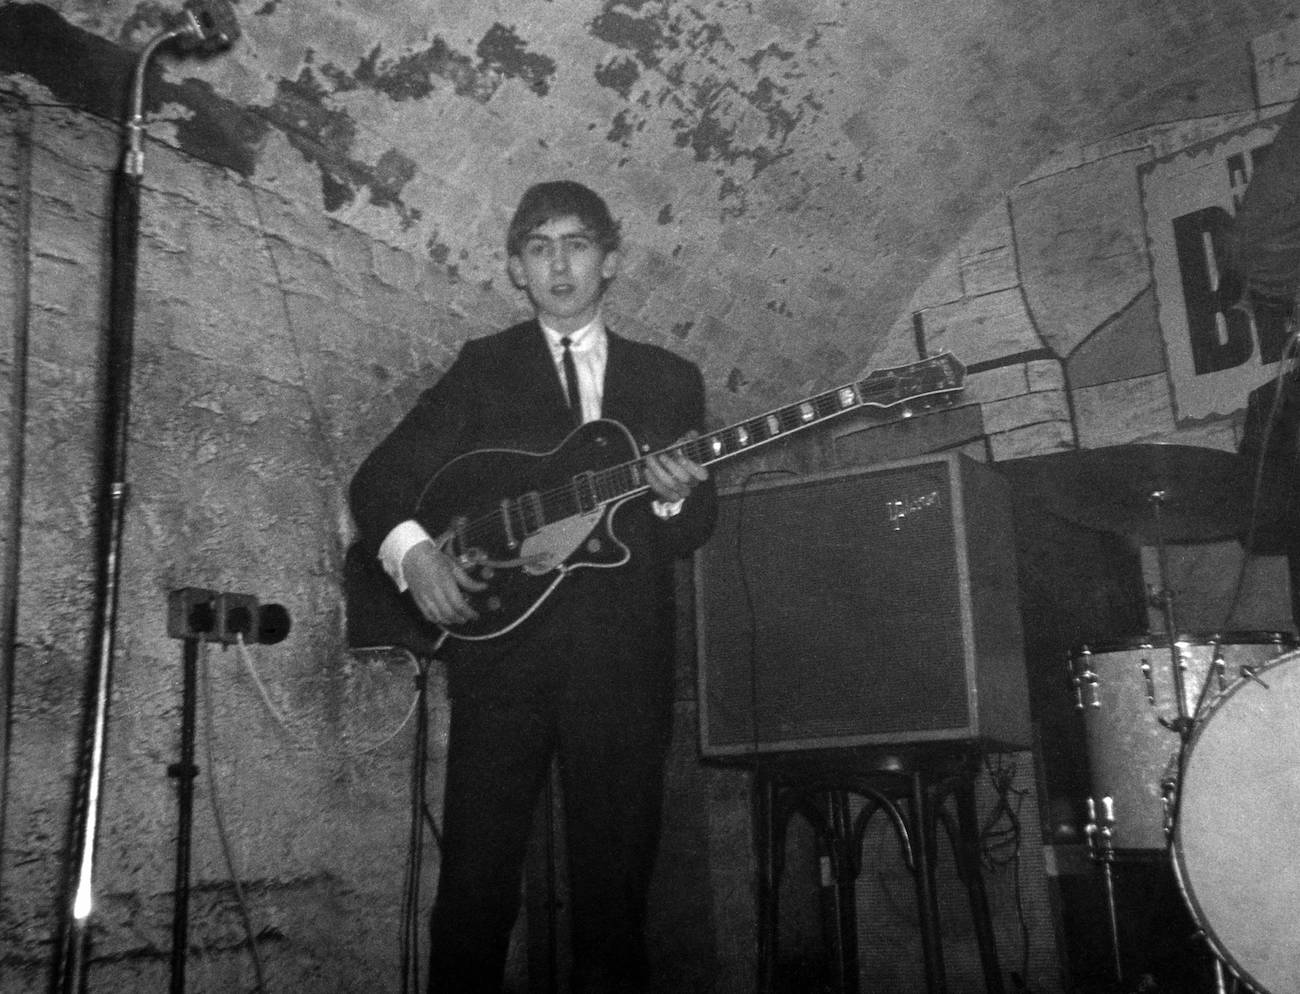 George Harrison performing with The Beatles at the Cavern Club in 1962.